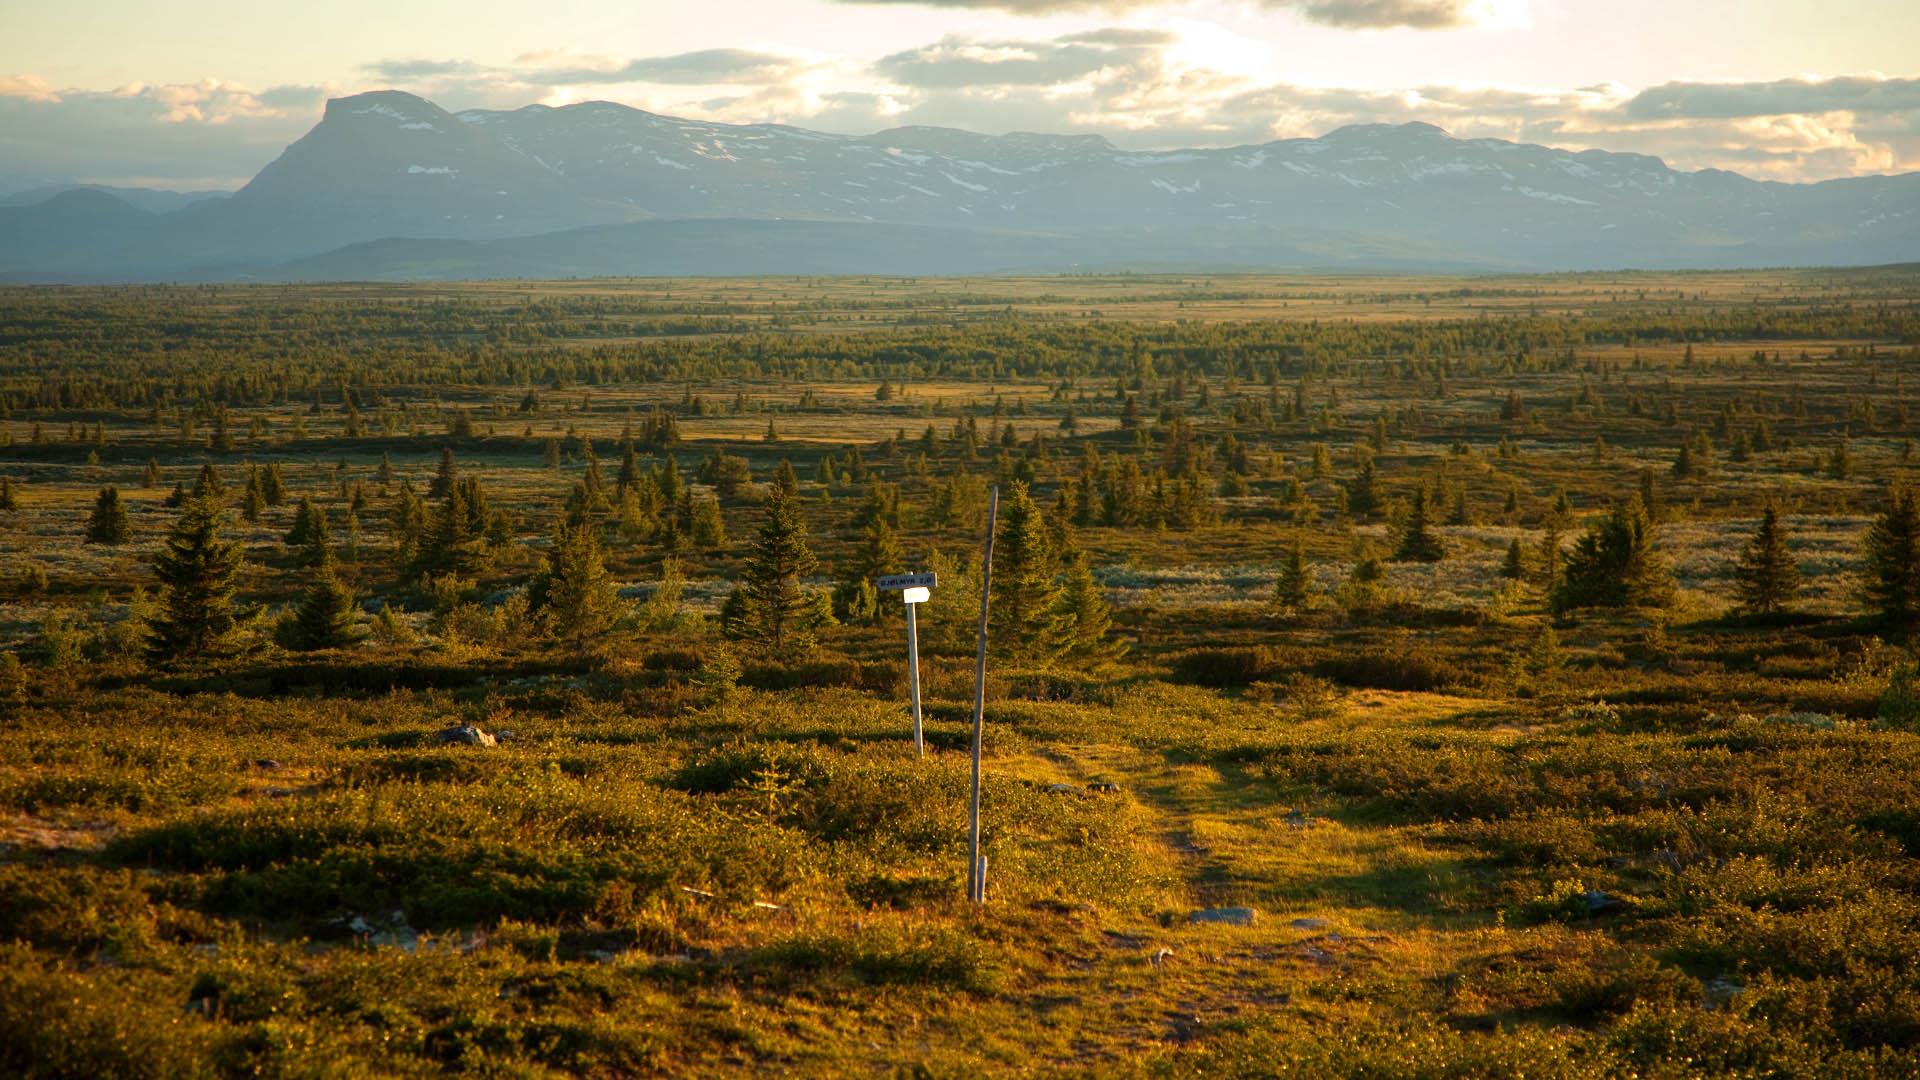 A highland plateau on the tree line with scattered spruce trees and open wet flats. In the background a mountain range. It's summer, and the scene is lit in warm evening light.